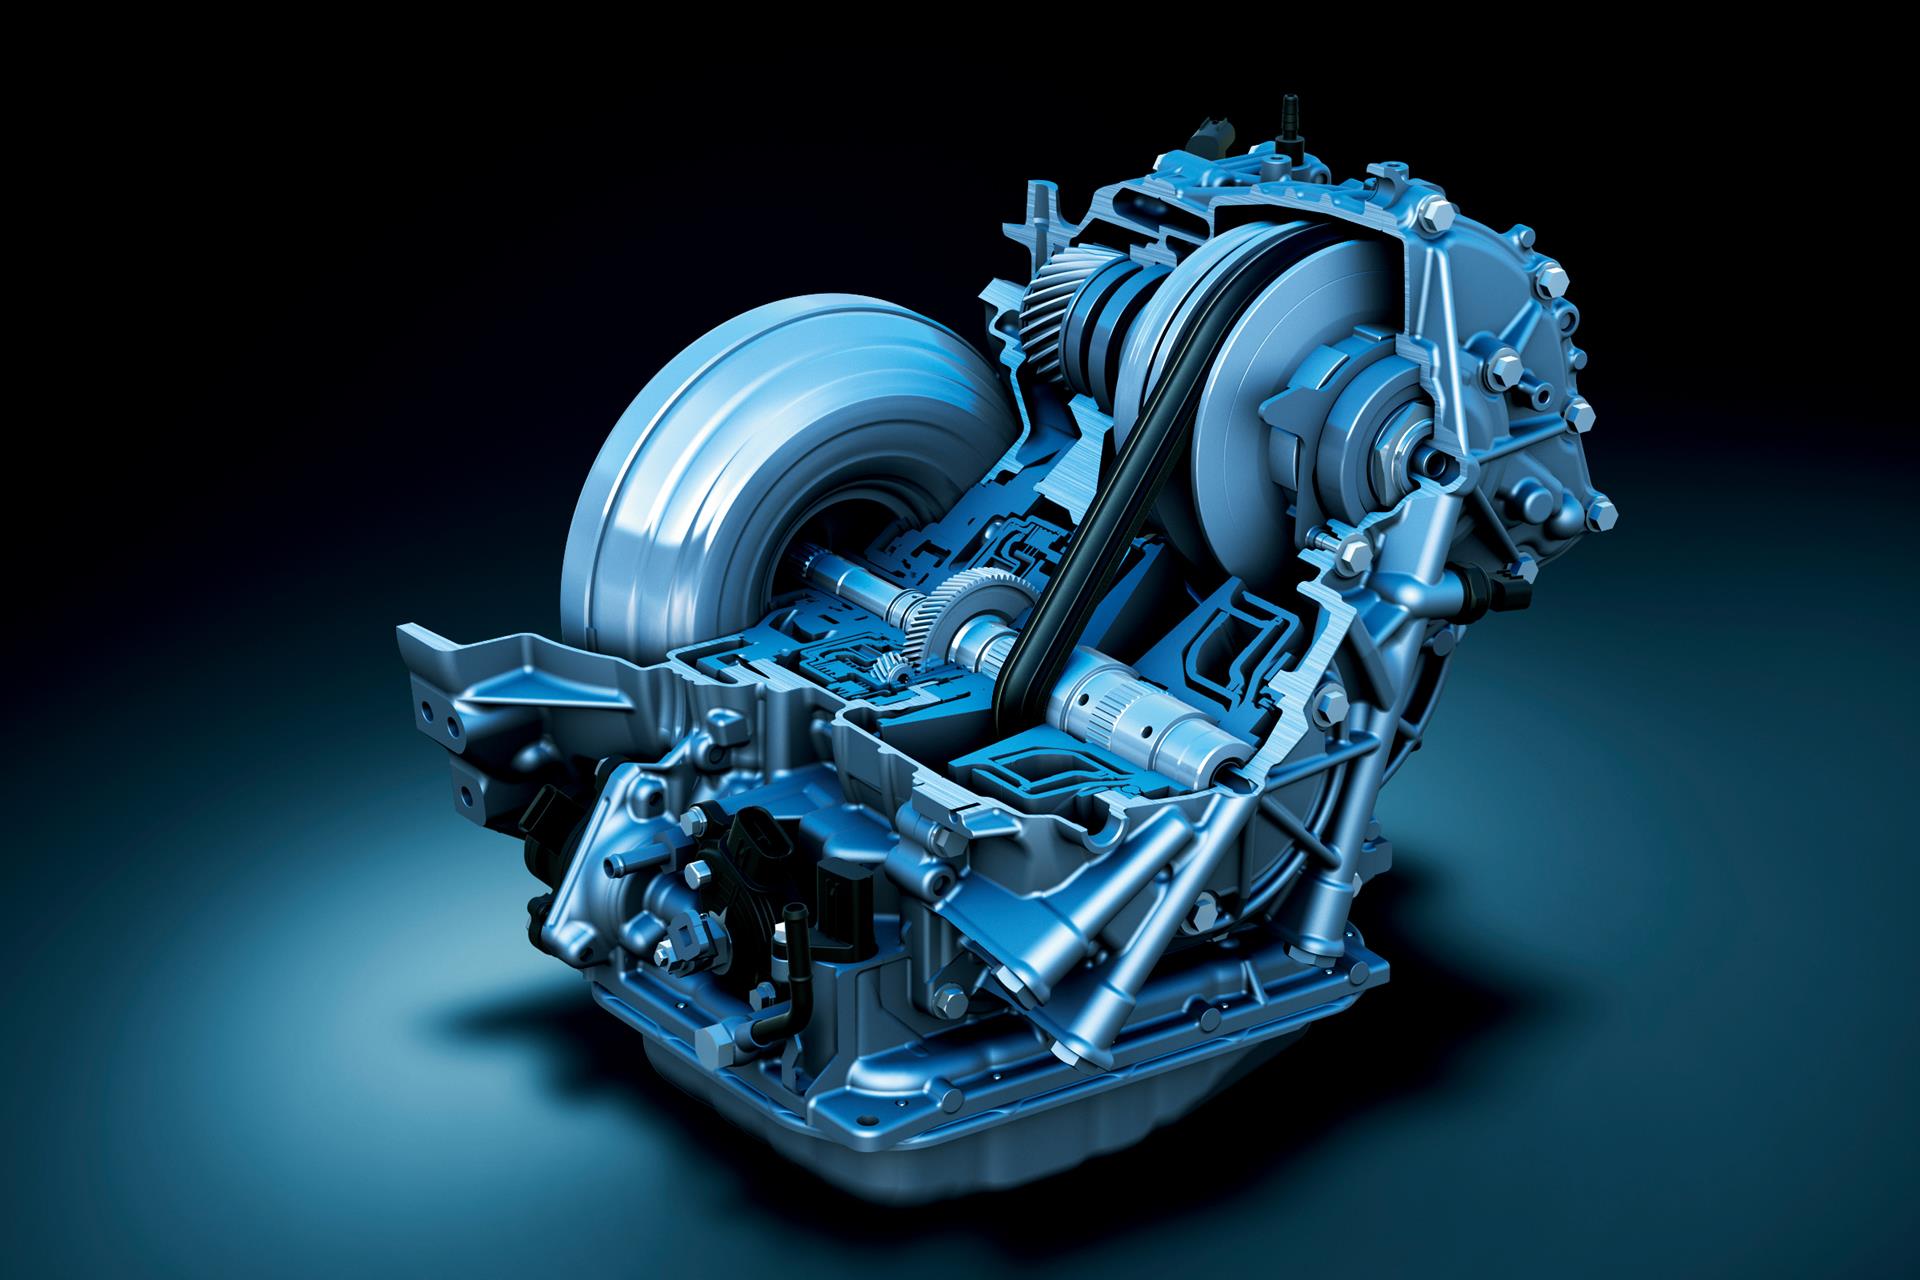 Super Cvt I Automatic Continuously Variable Transmission Toyota Motor Corporation Official Global Website